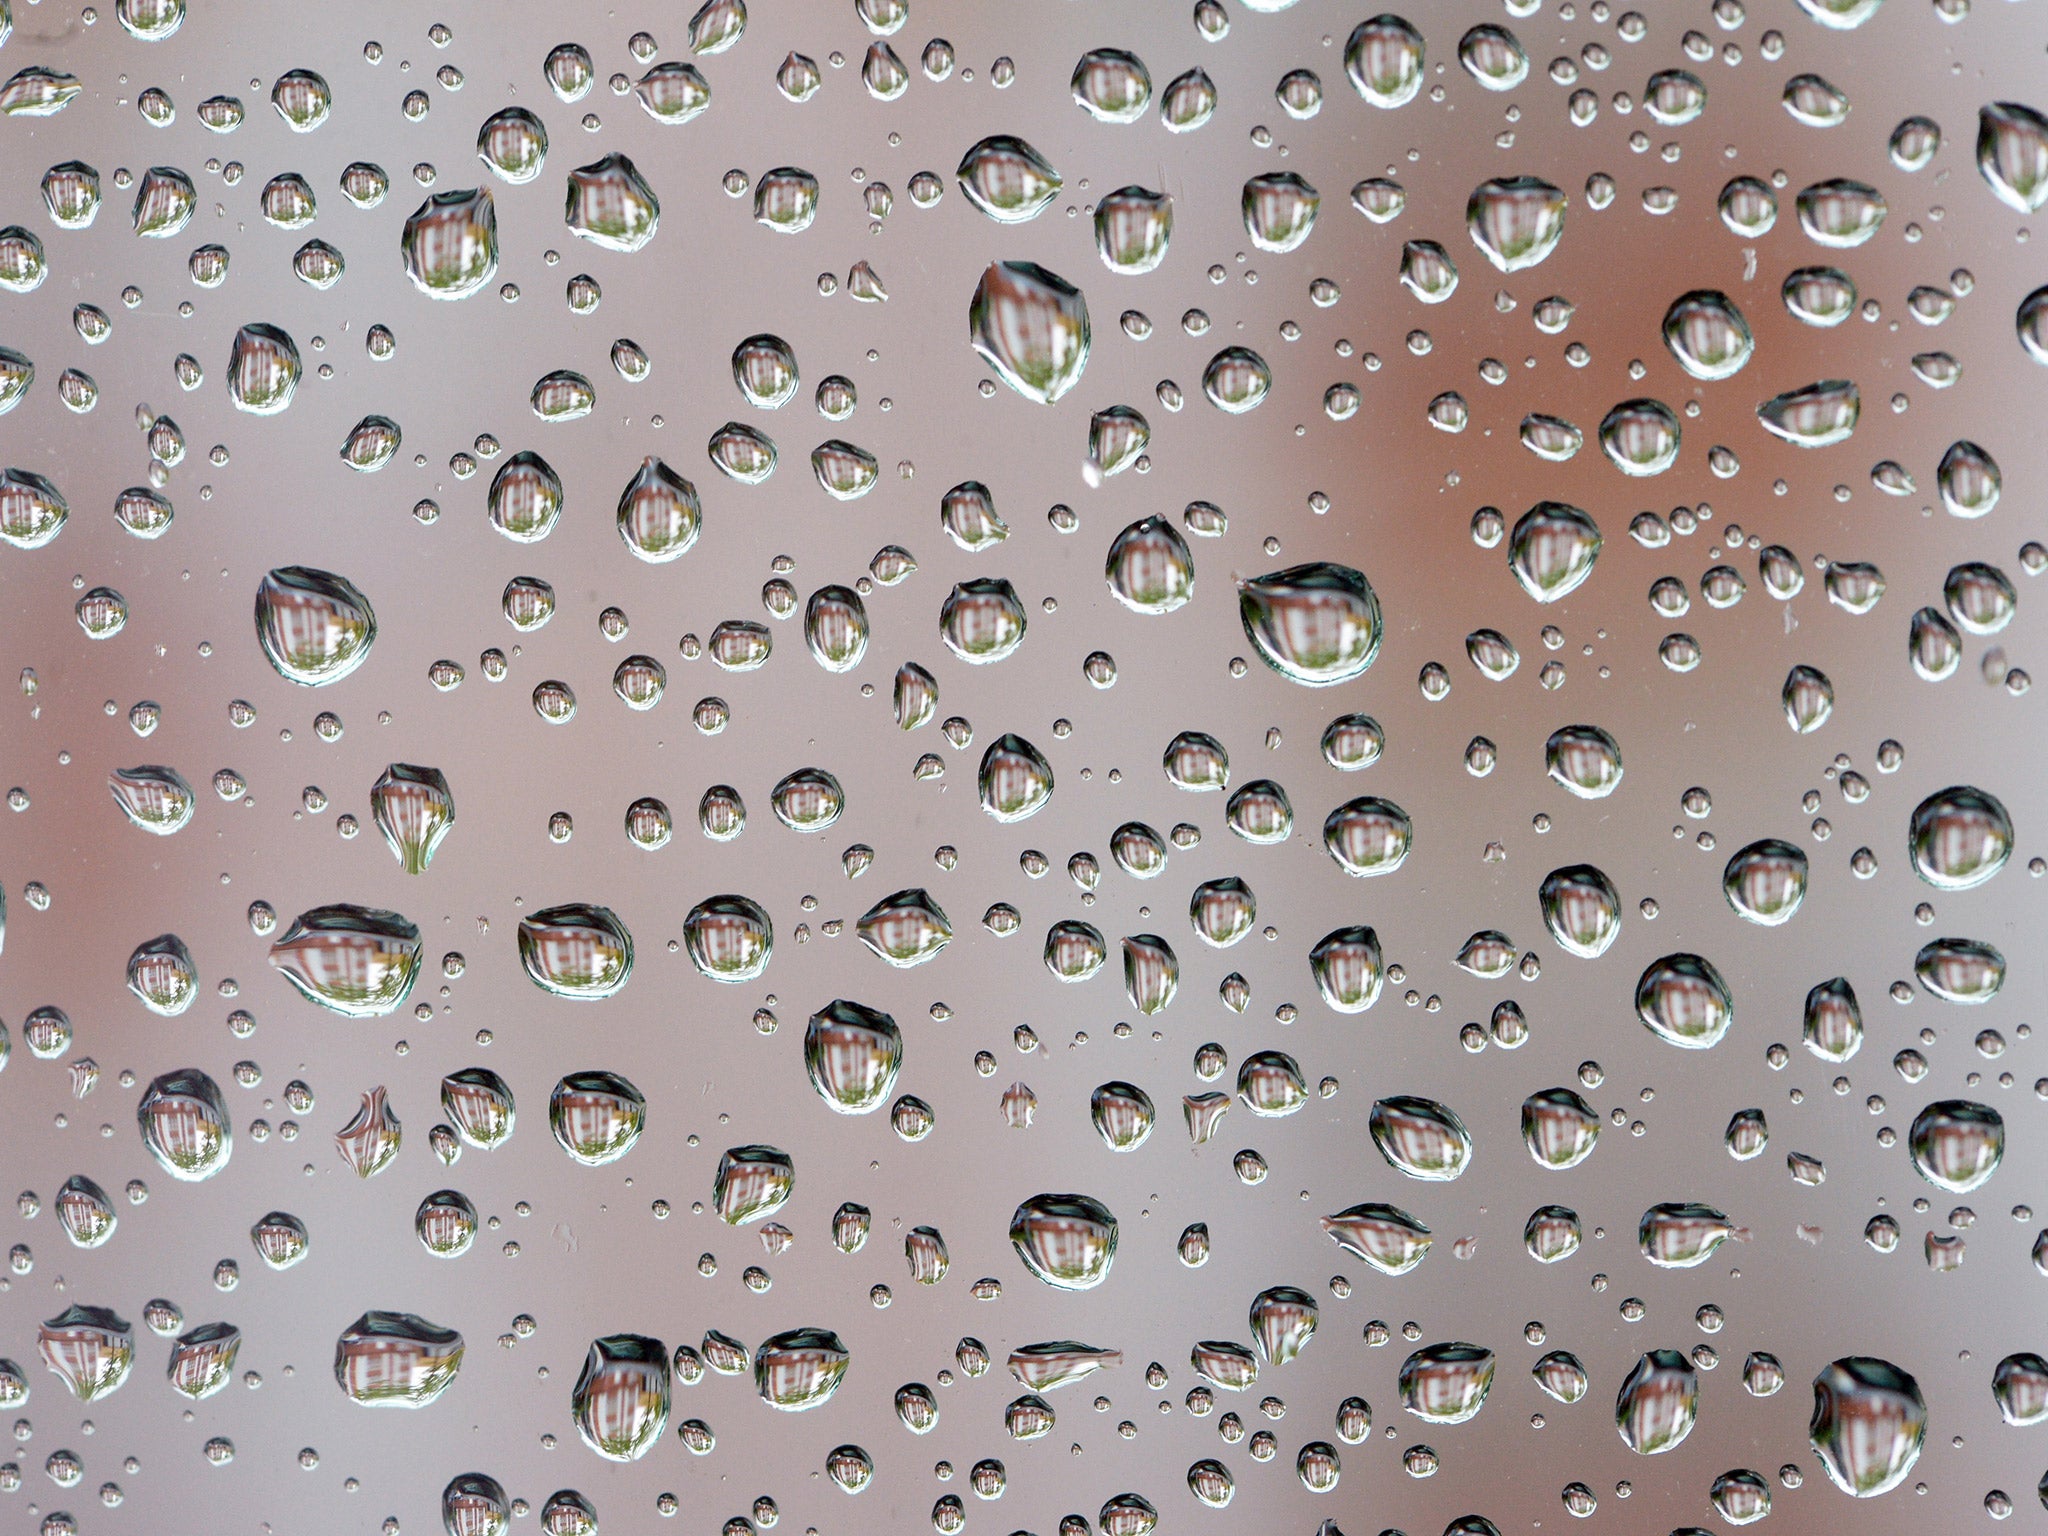 Condensation on a window. Researchers have designed a surface to capture and store water droplets